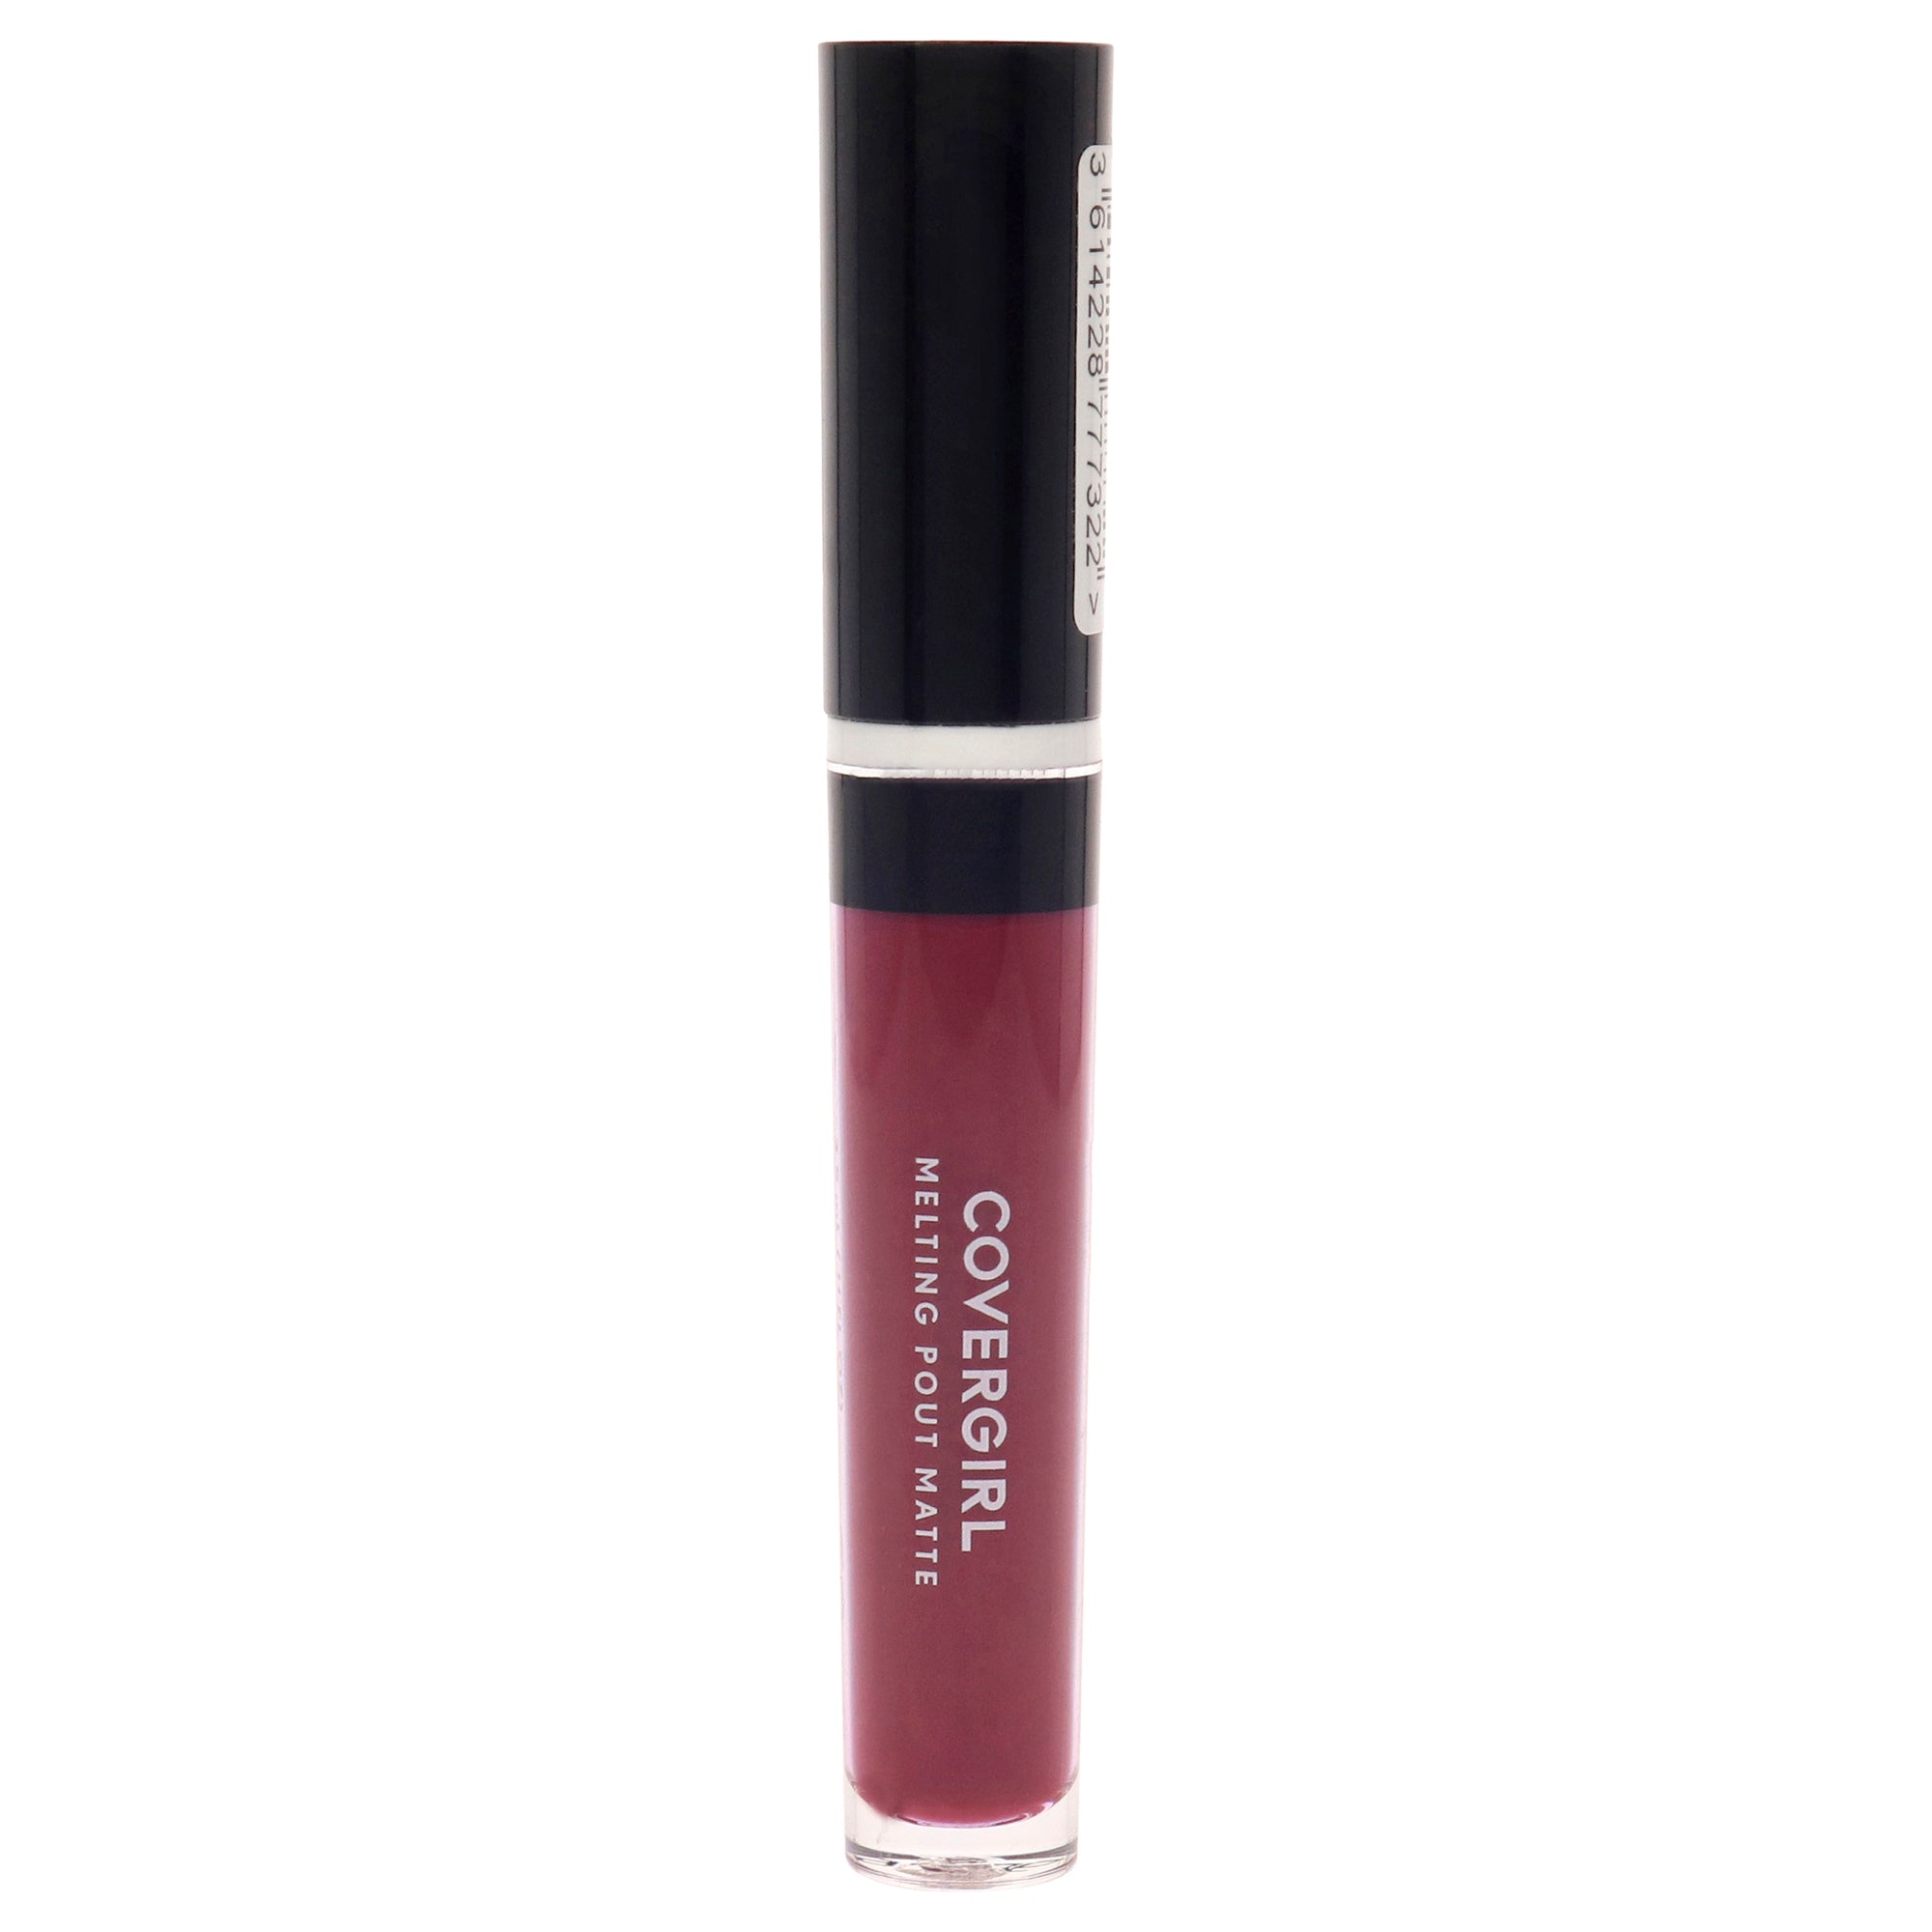 Melting Pout Matte Liquid Lipstick - 319 Blood Moon by CoverGirl for Women - 0.11 oz Lipstick